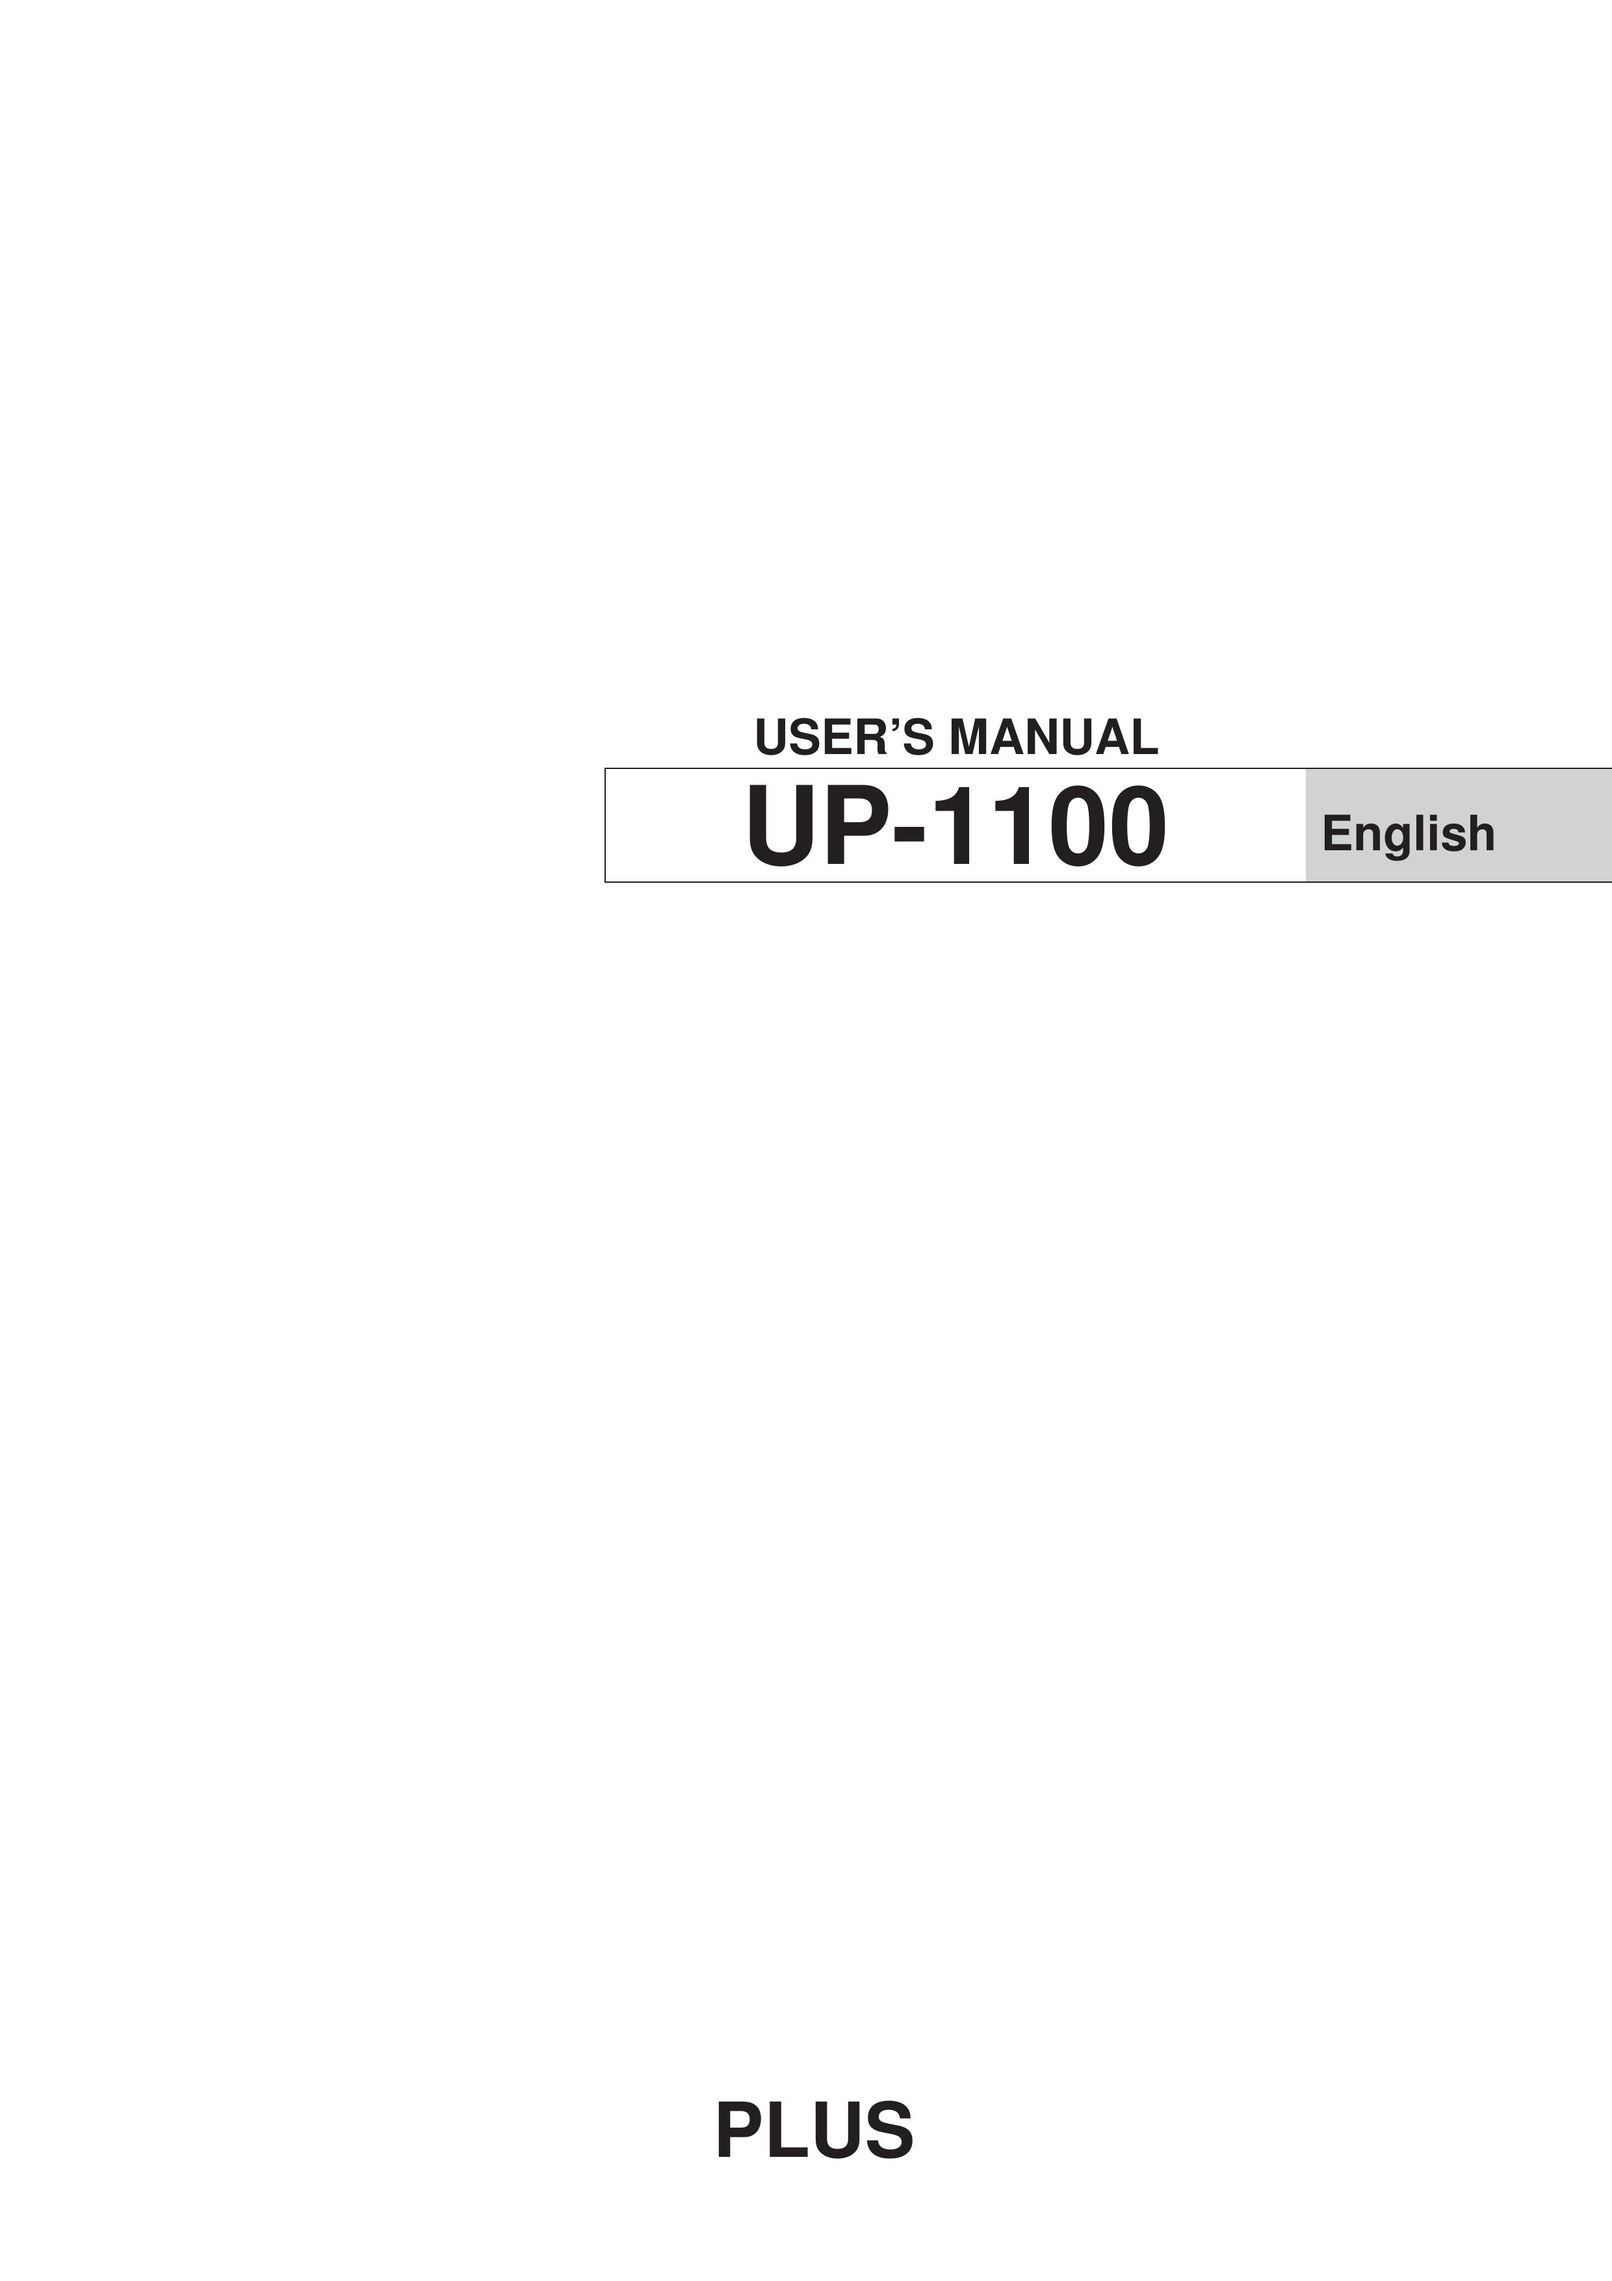 Plus UP-1100 Projector User Manual